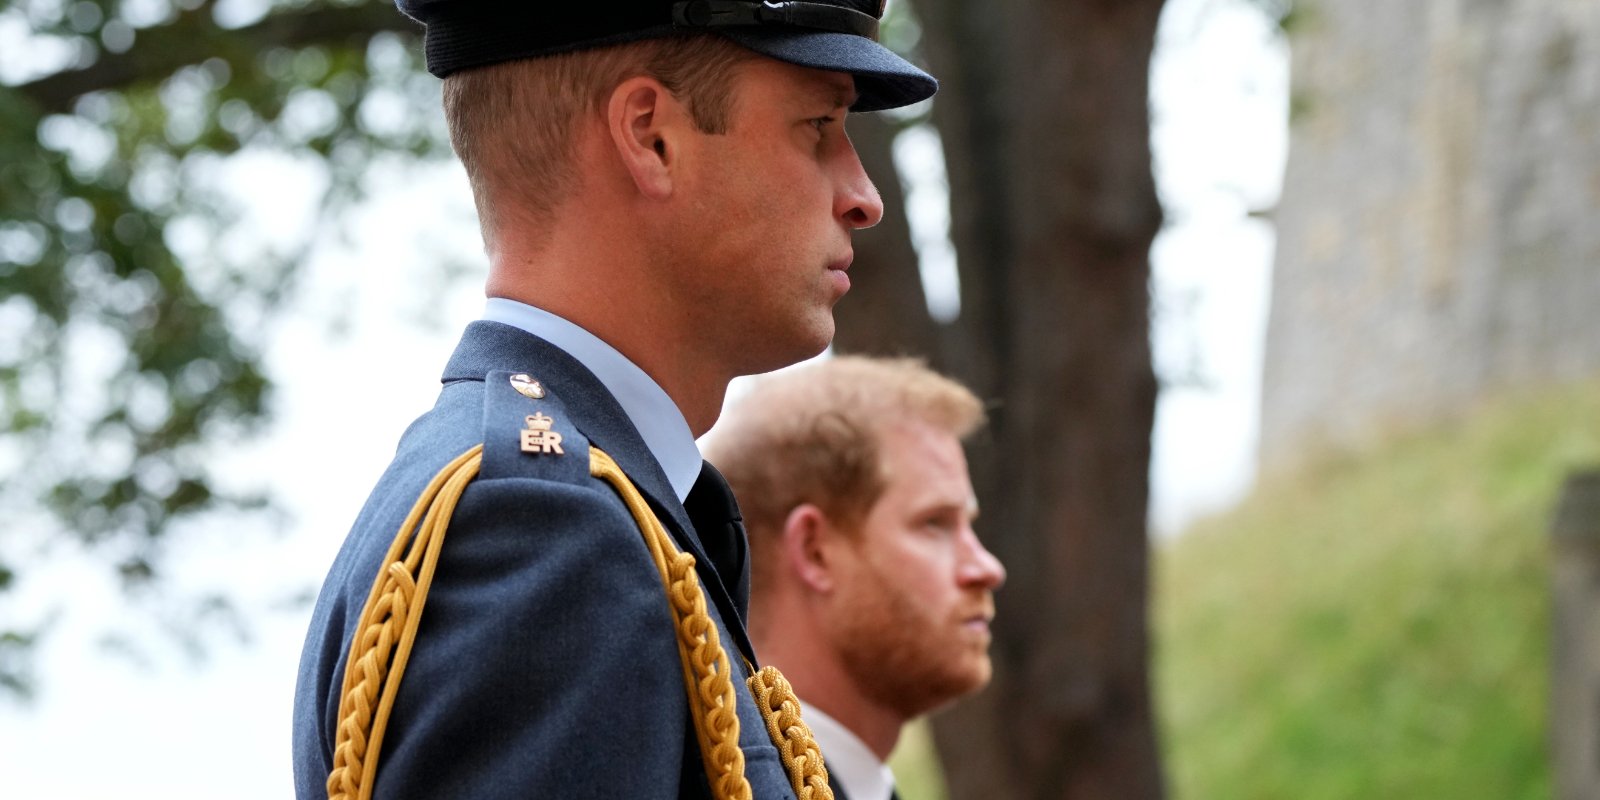 Prince William and Prince Harry at Queen Elizabeth's funeral in September 2022.